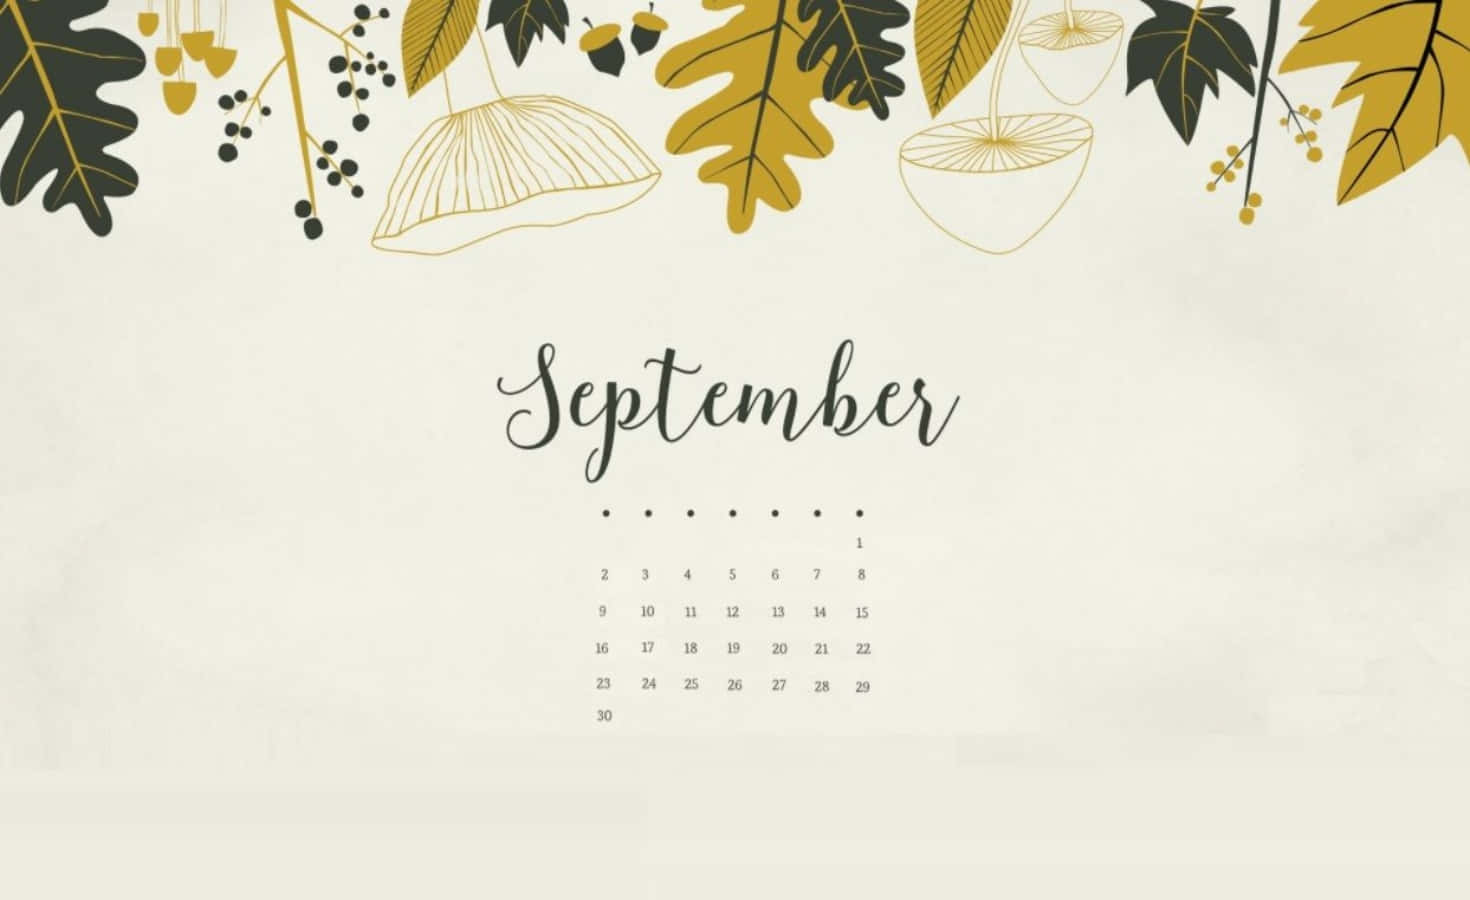 September Calendar With Leaves And Leaves